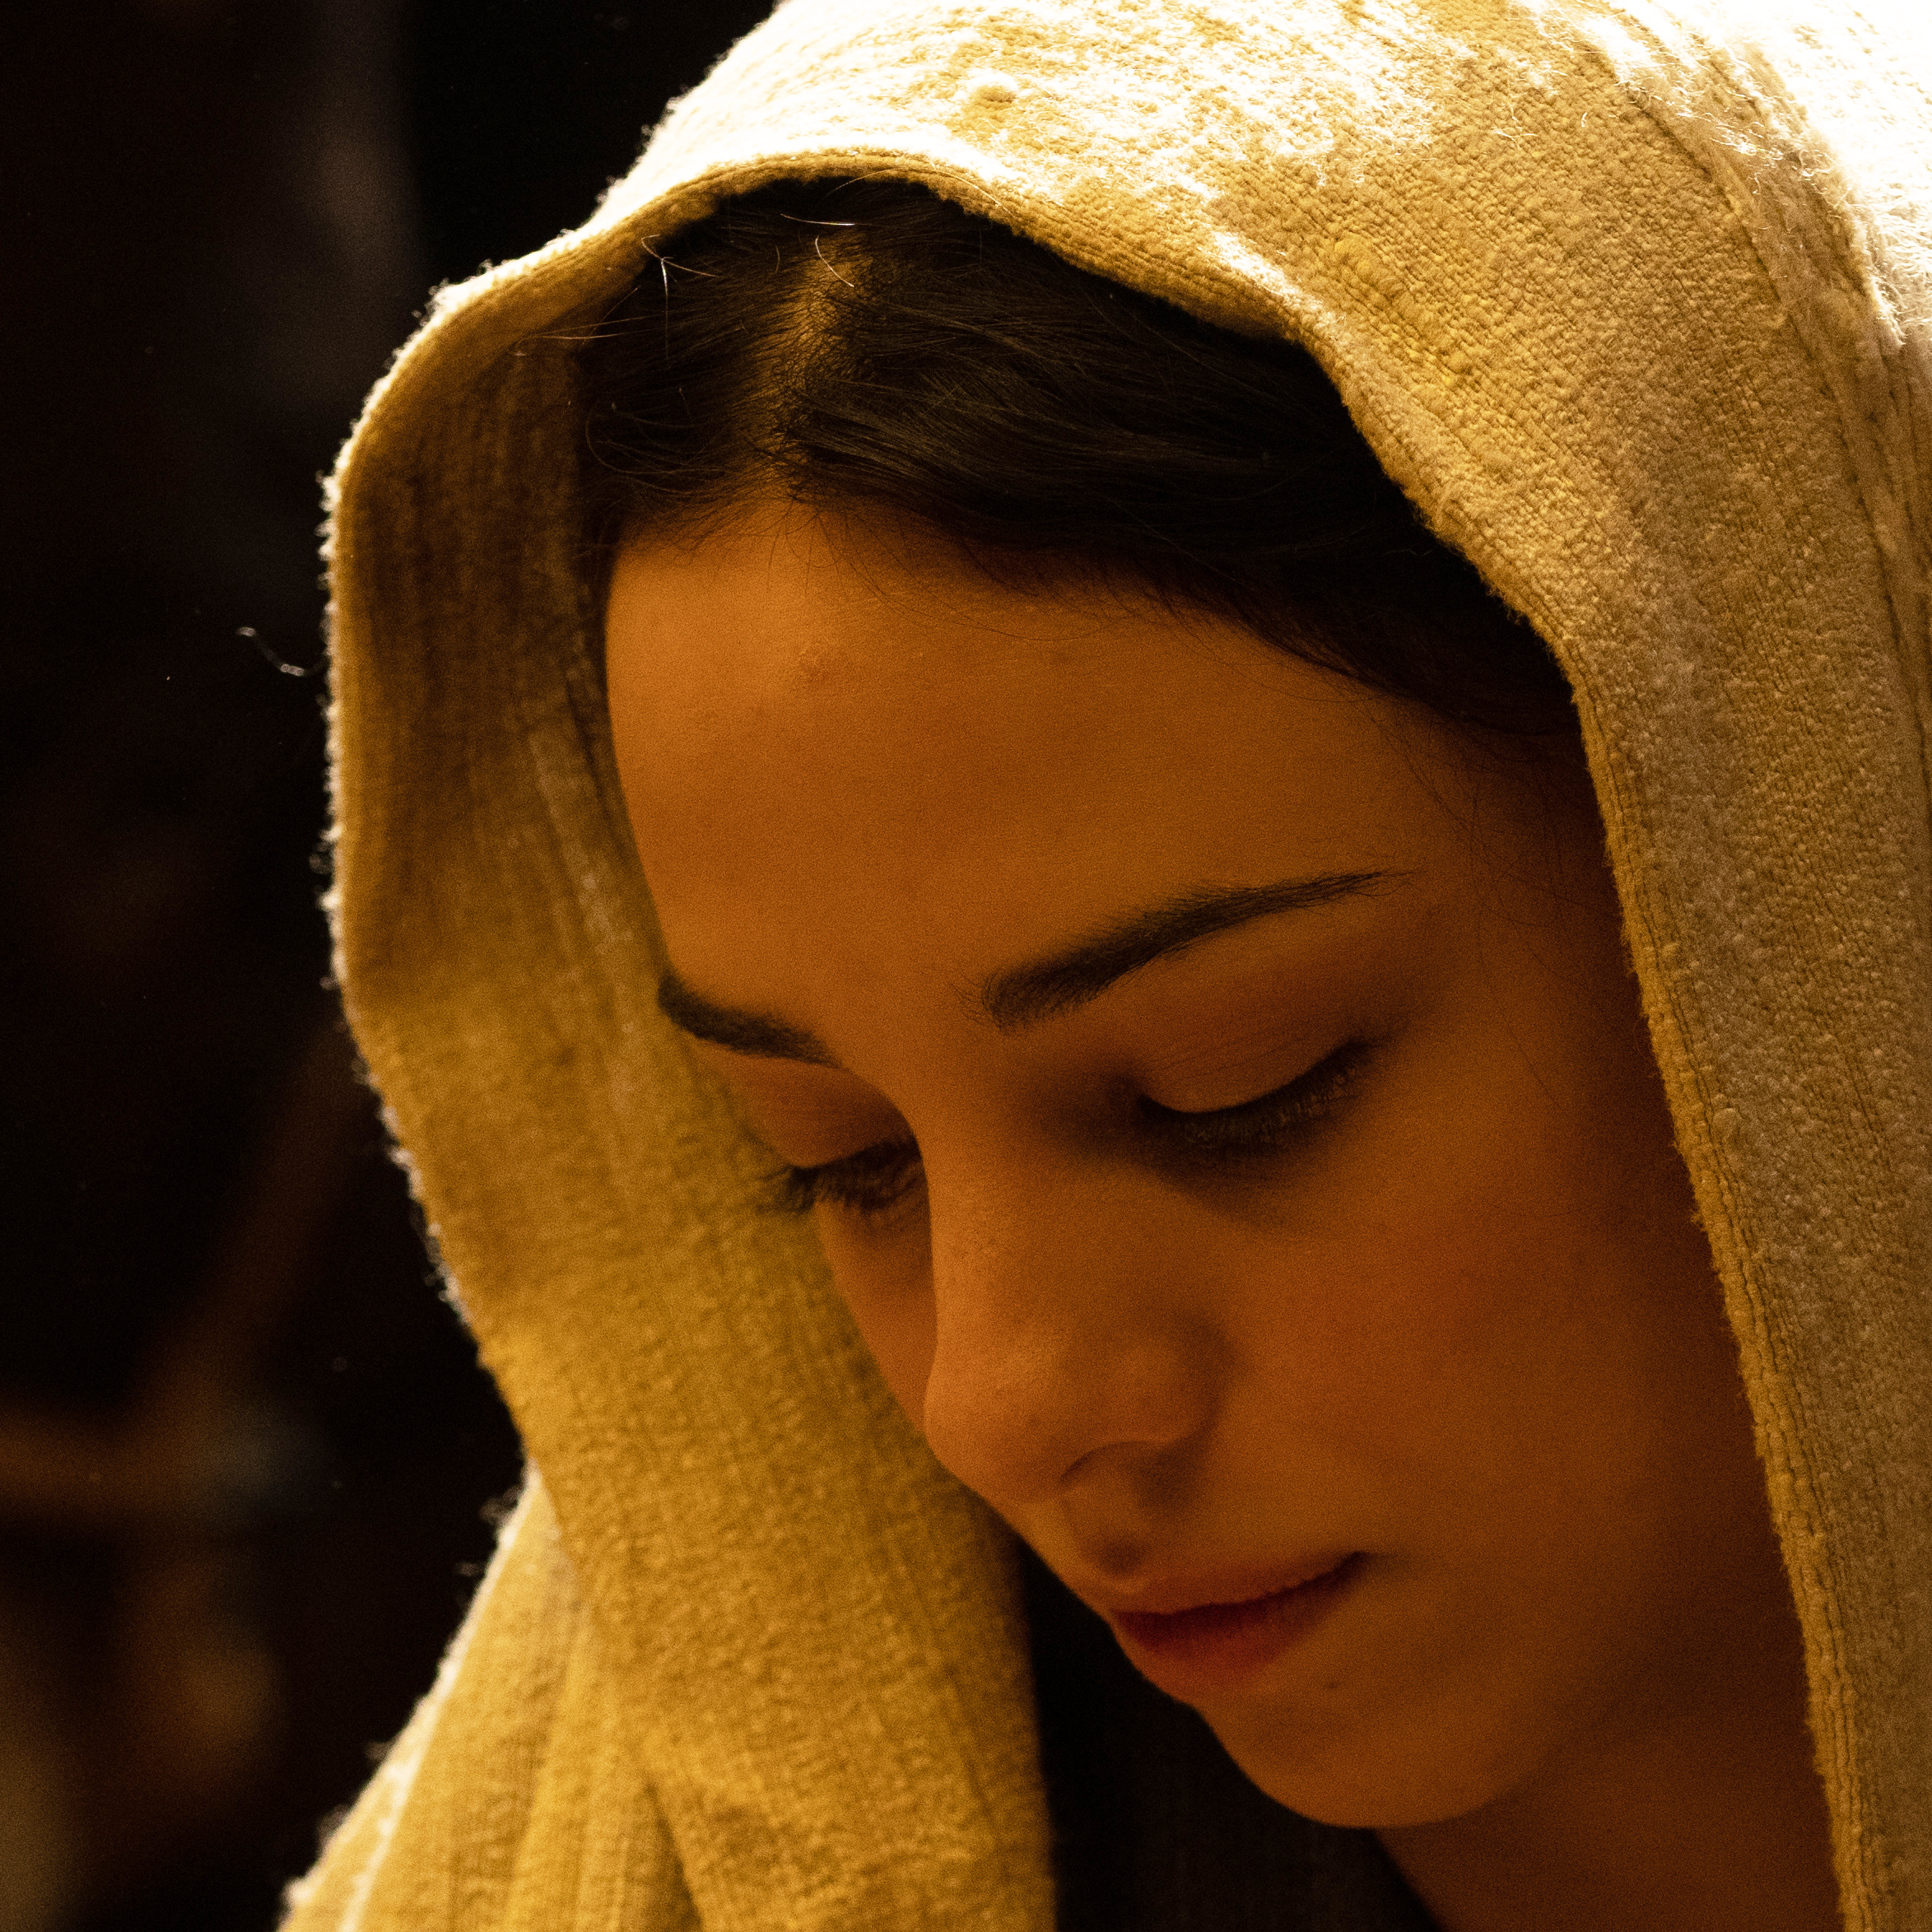 Mary as portrayed in Journey to Bethlehem